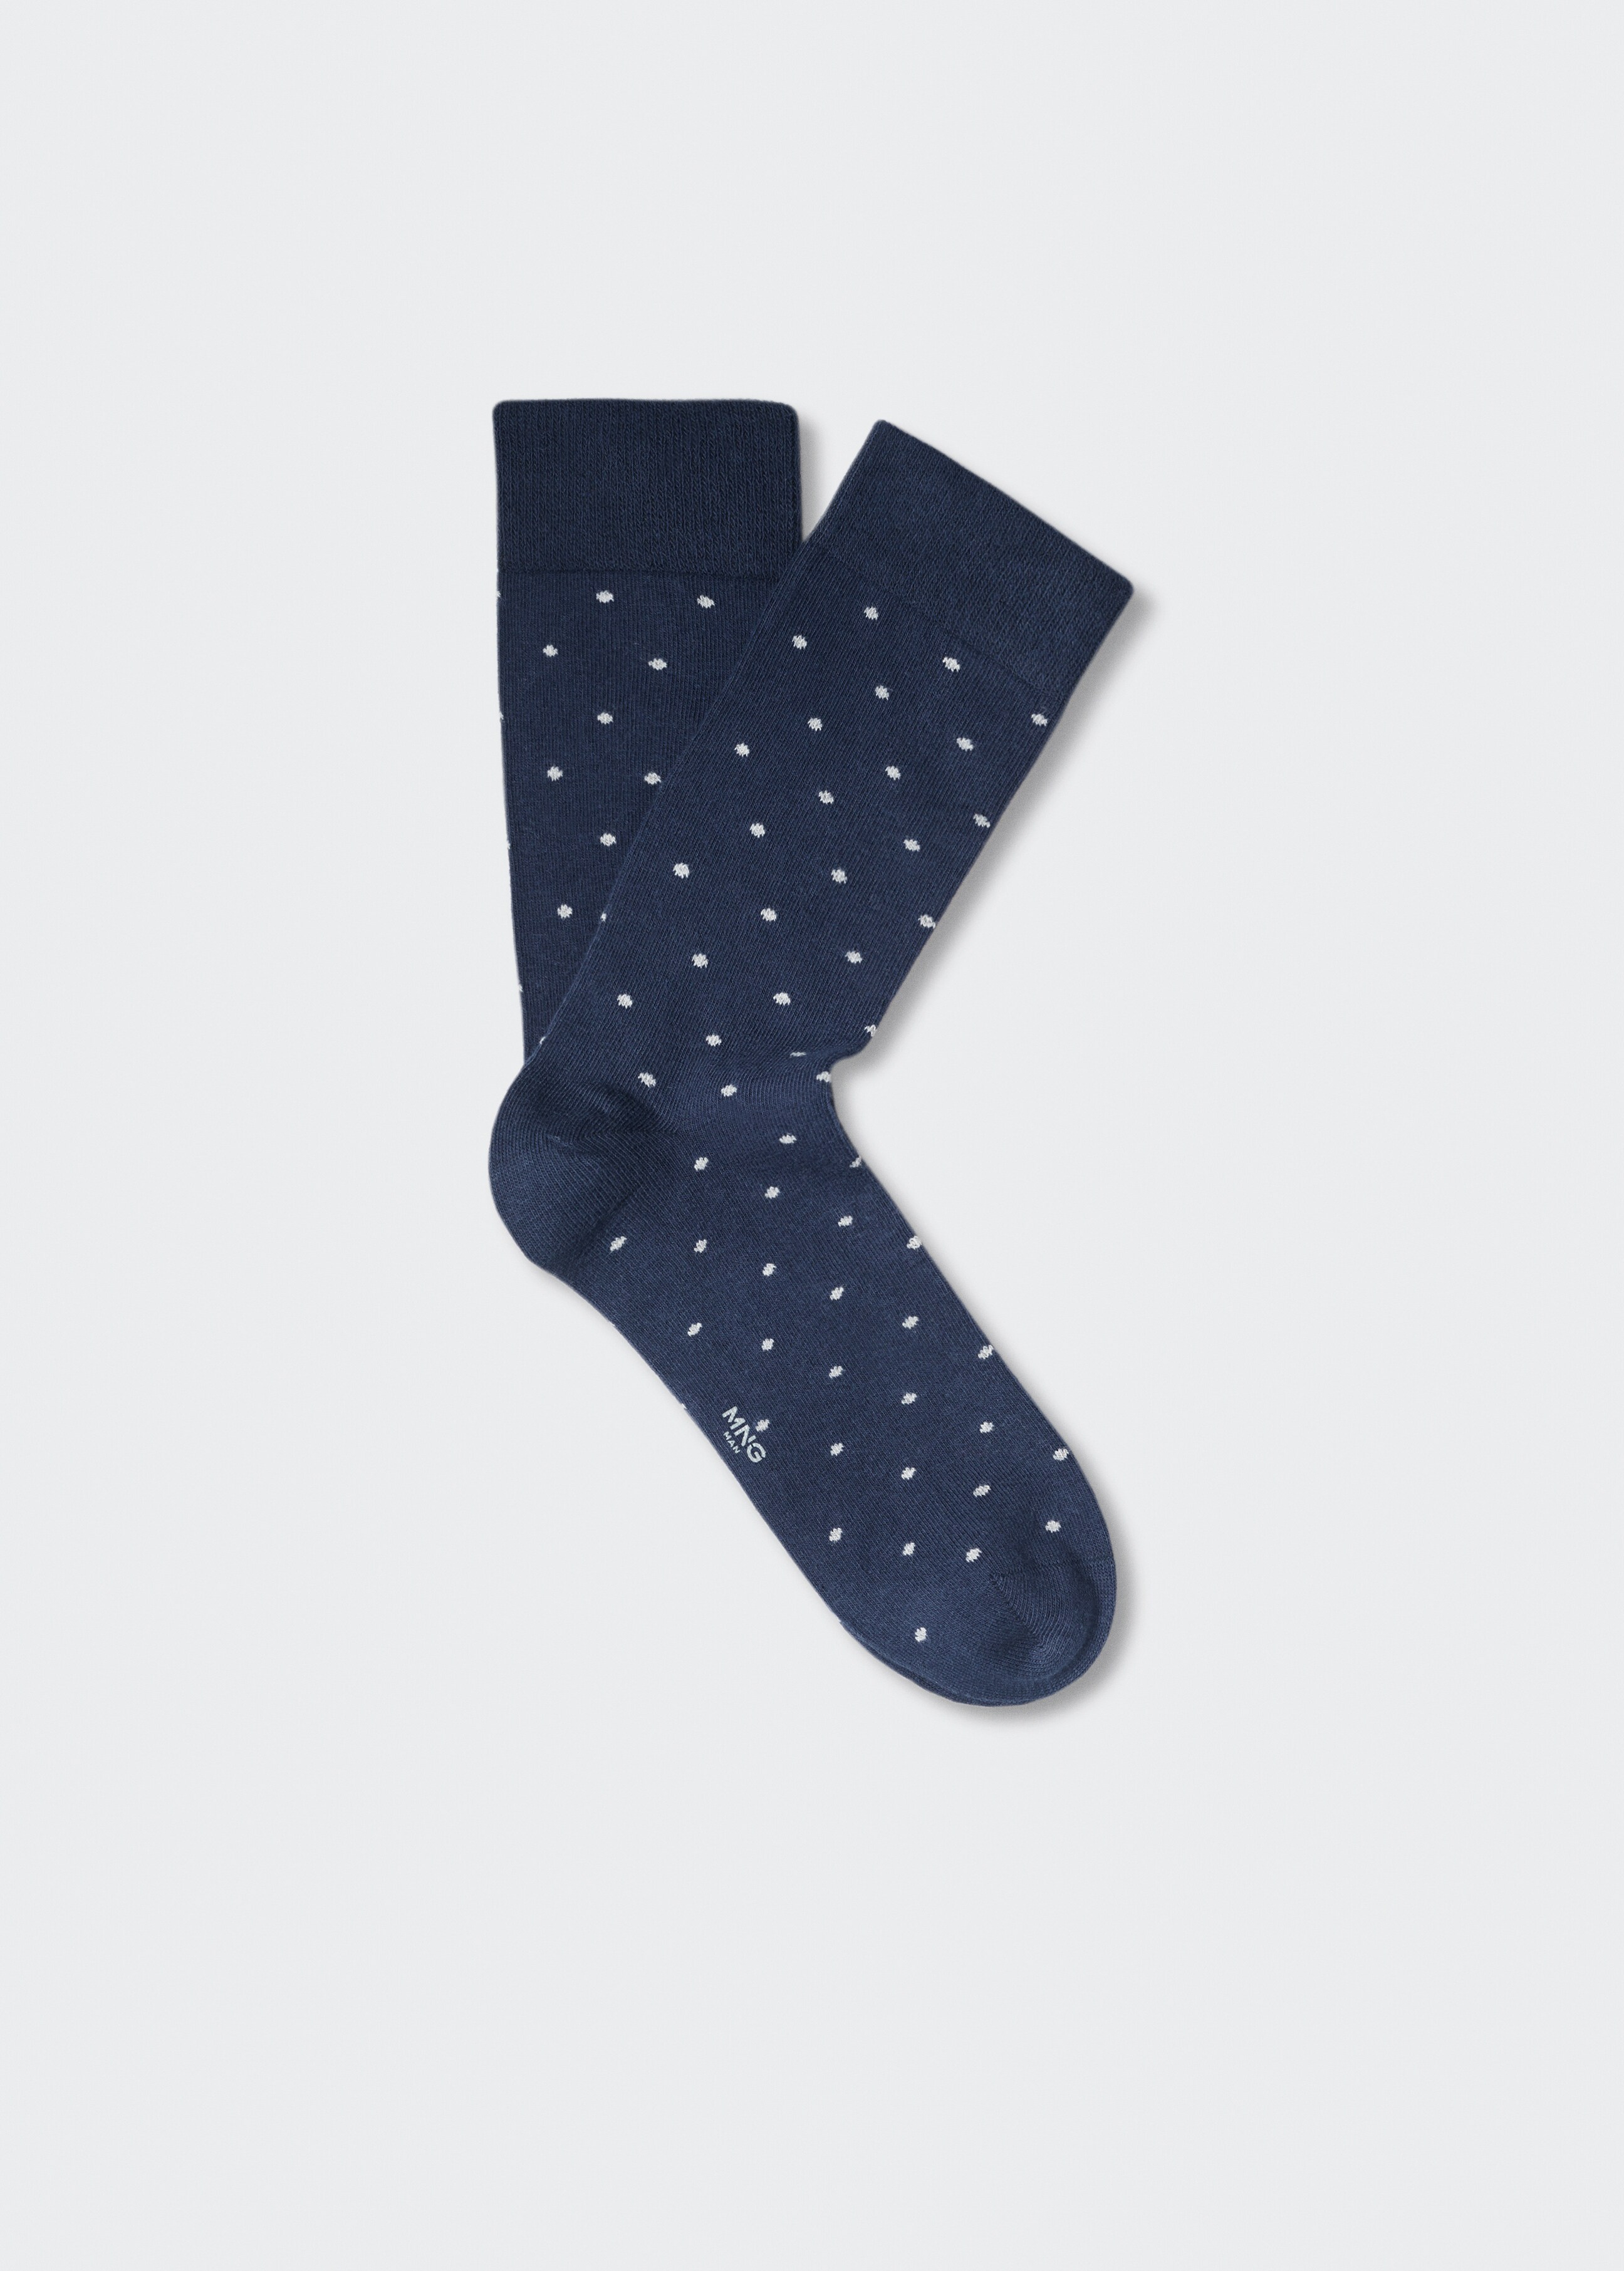 Polka dot cotton socks - Article without model